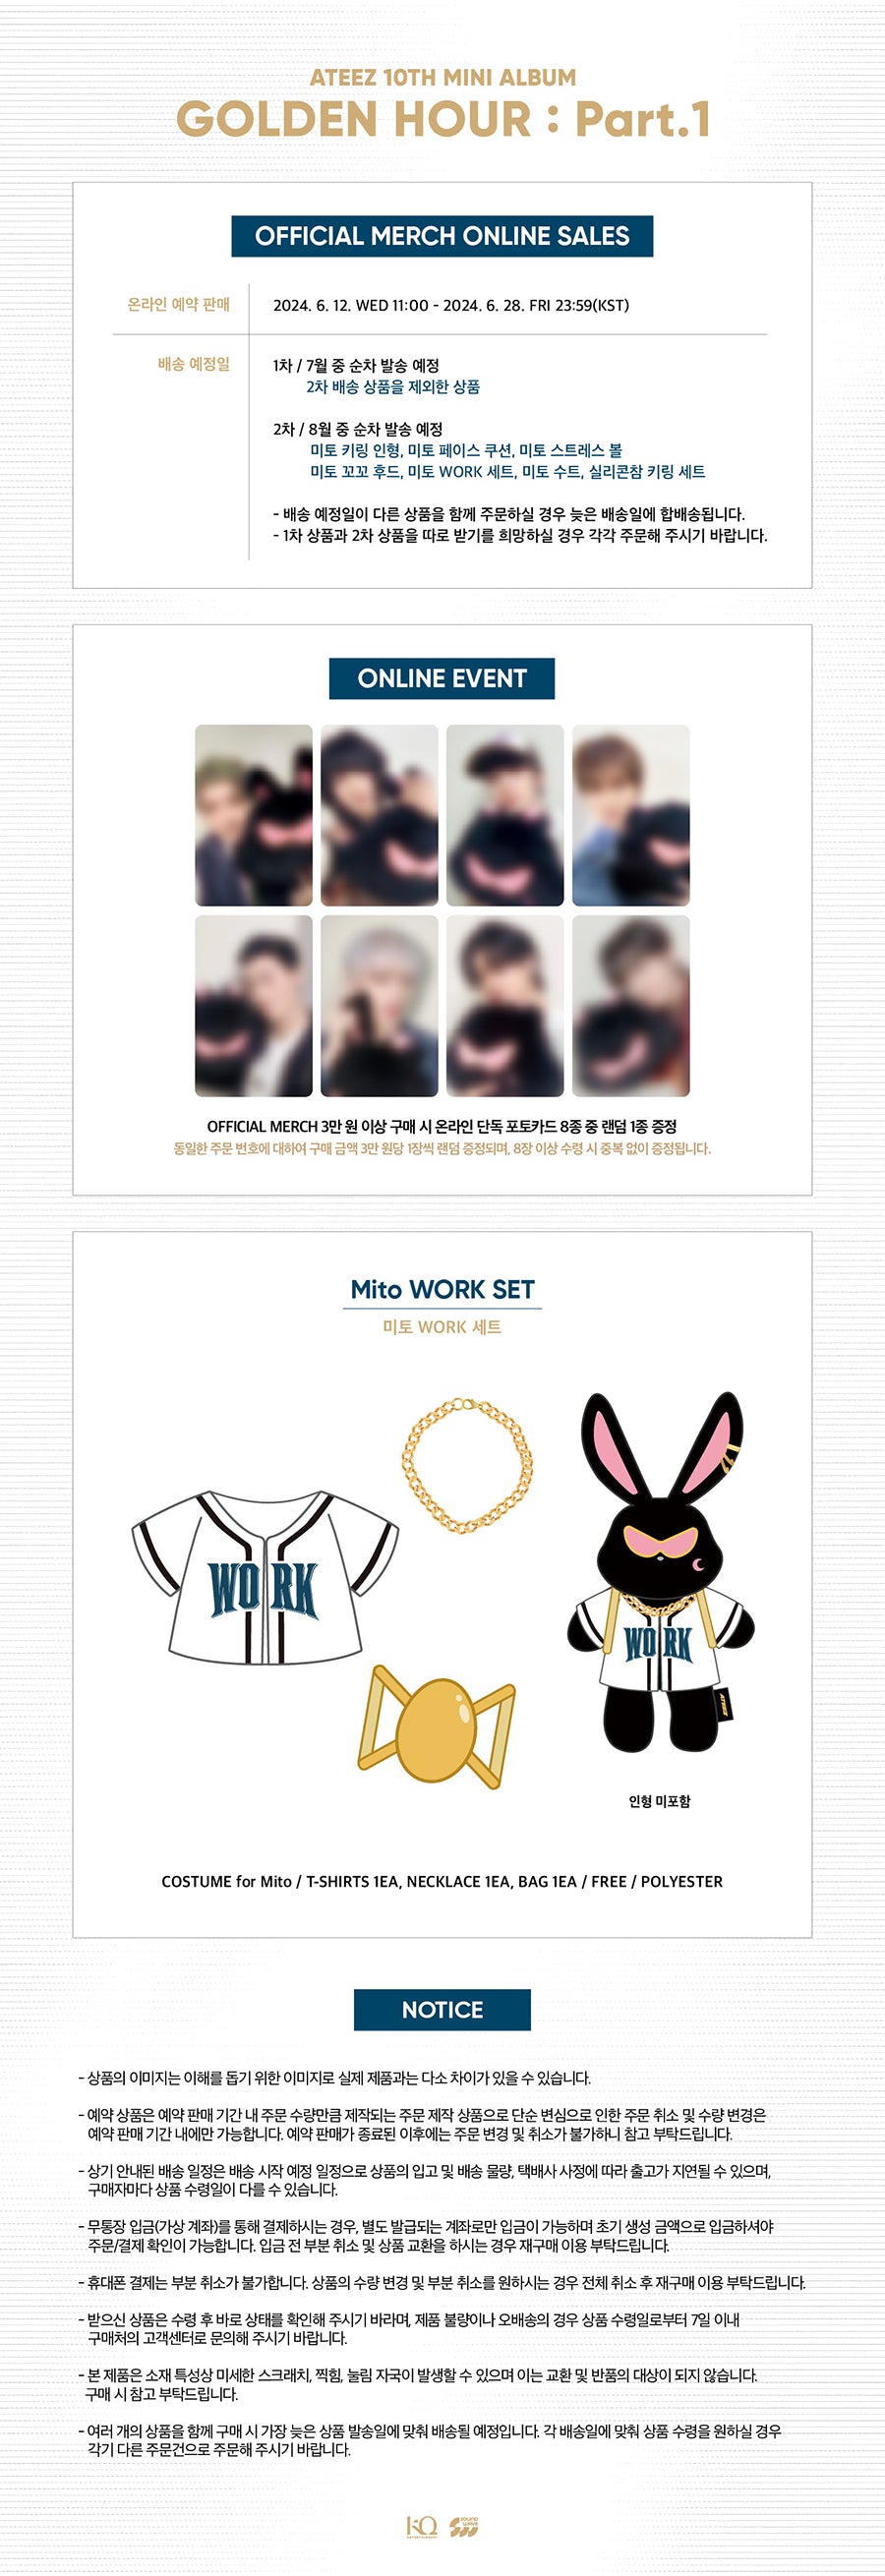 [PRE-ORDER] ATEEZ - Mito WORK Set [GOLDEN HOUR : Part.1 Official MD]